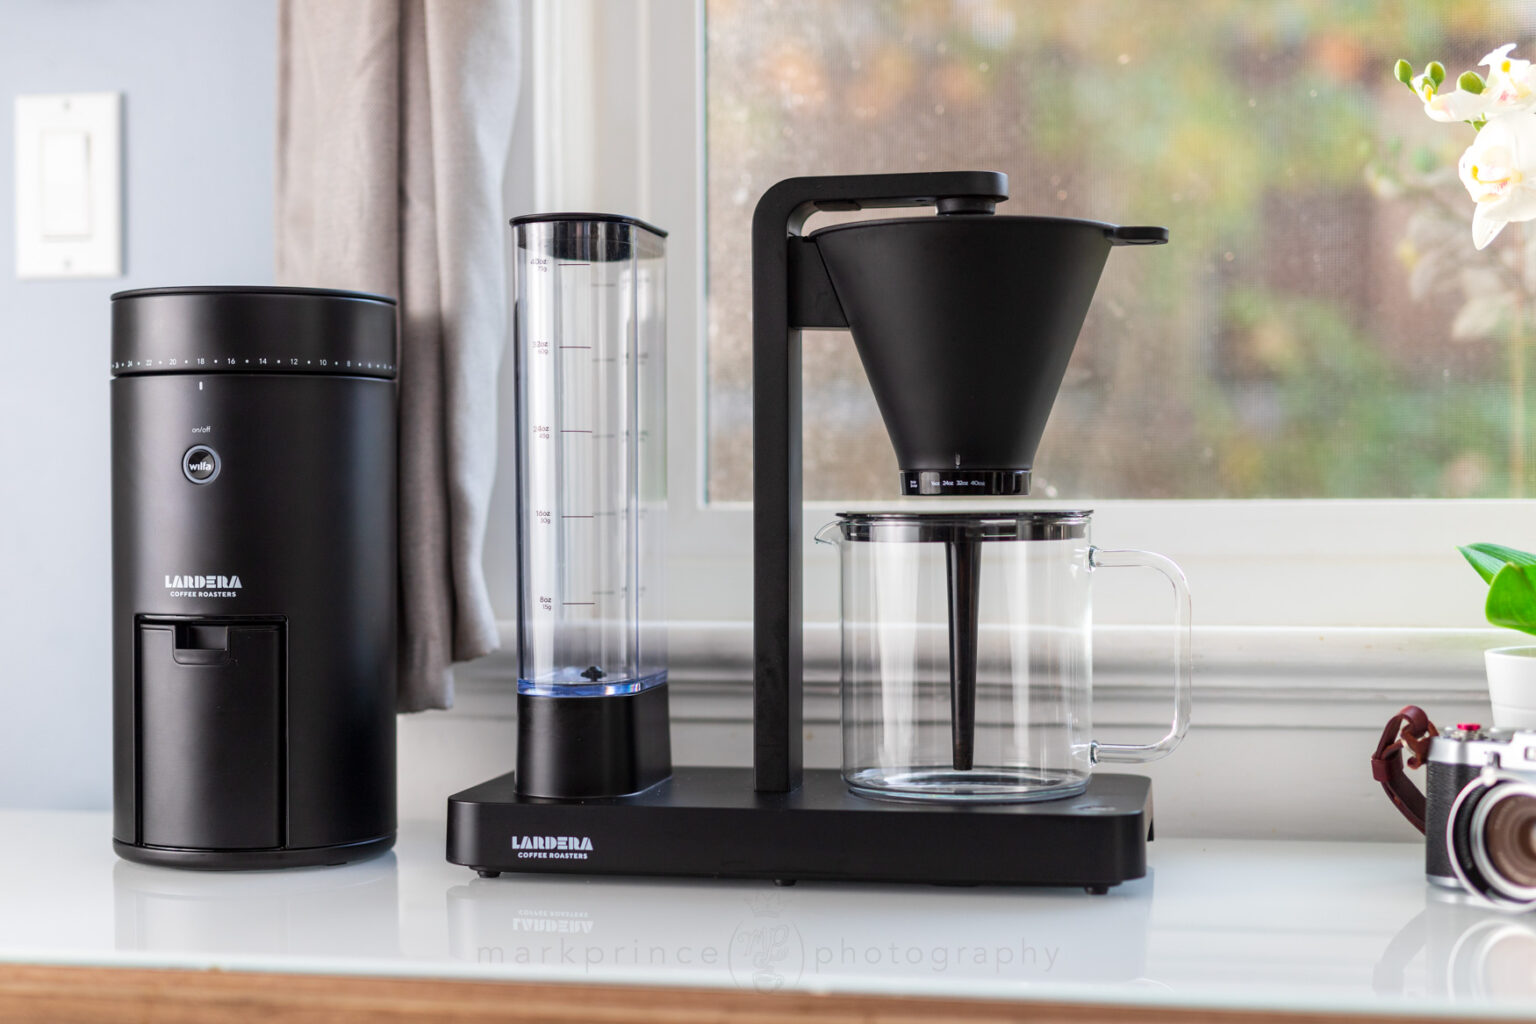 The Wilfa Uniform is an excellent single dose brewer for almost any brewing method, but is a match made in heaven when paired up with the Wilfa Performance auto drip coffee maker.